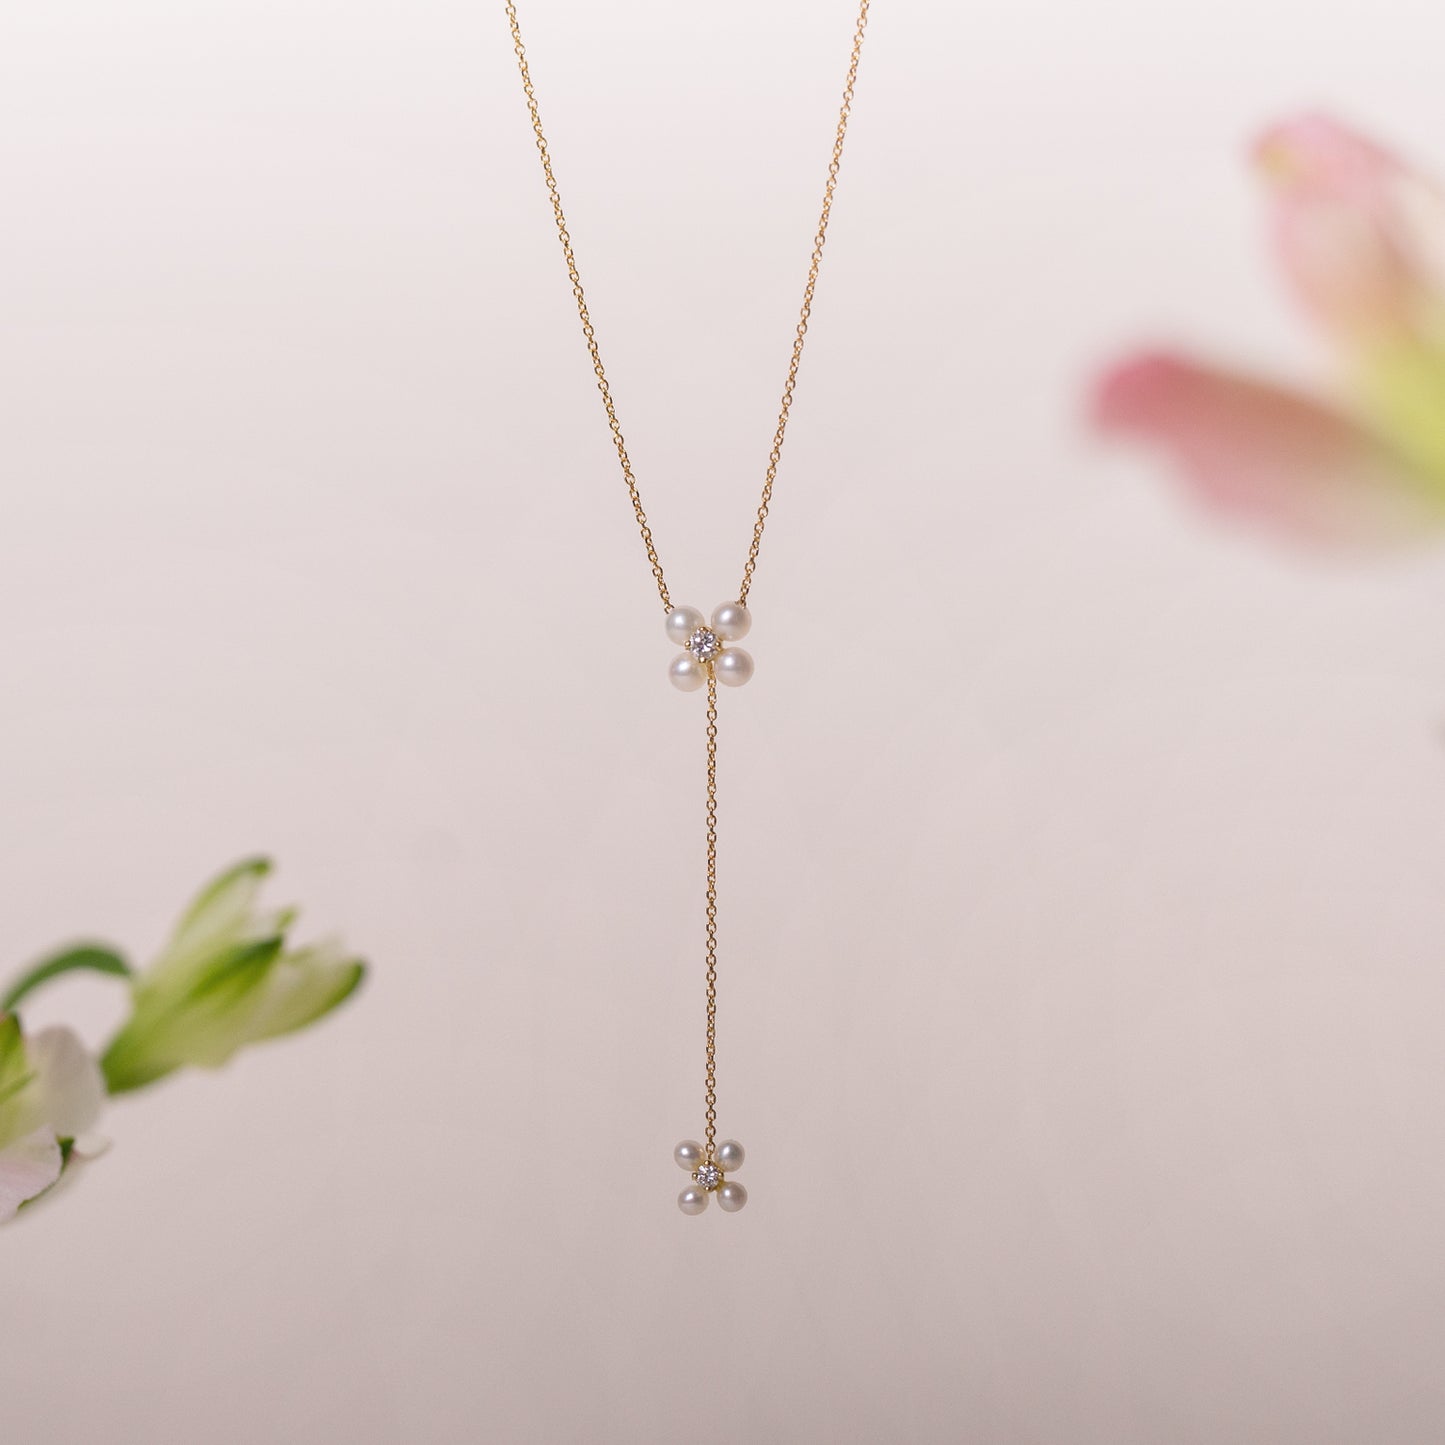 Sale Pearl Flower Necklace with Diamond